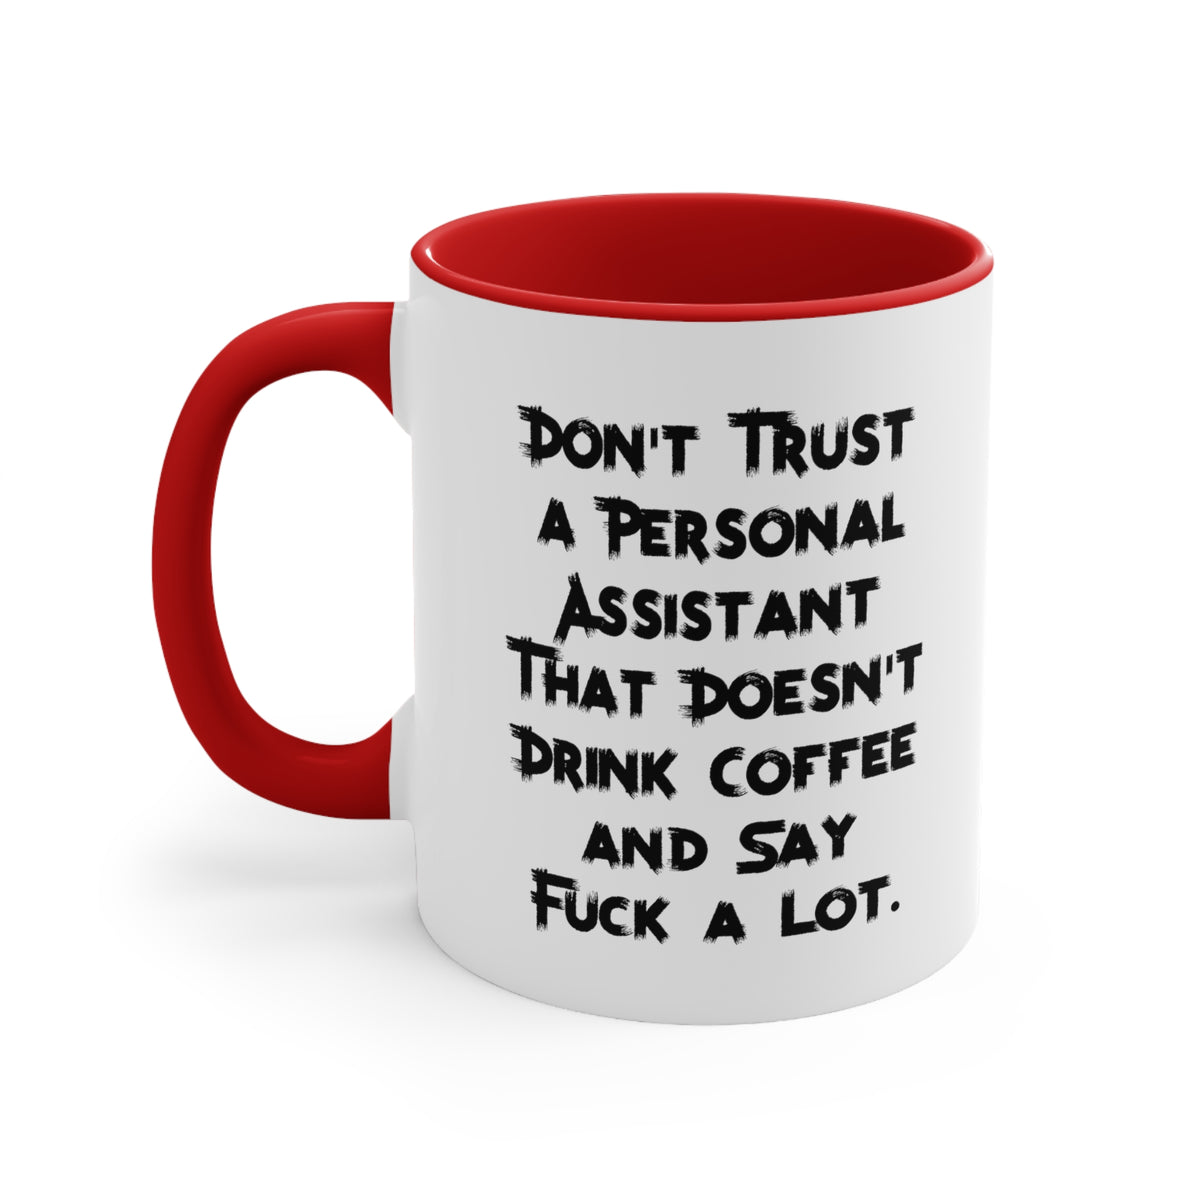 Don't Trust a Personal Assistant That Doesn't Drink. Personal assistant Two Tone 11oz Mug, Epic Personal assistant, Cup For Coworkers